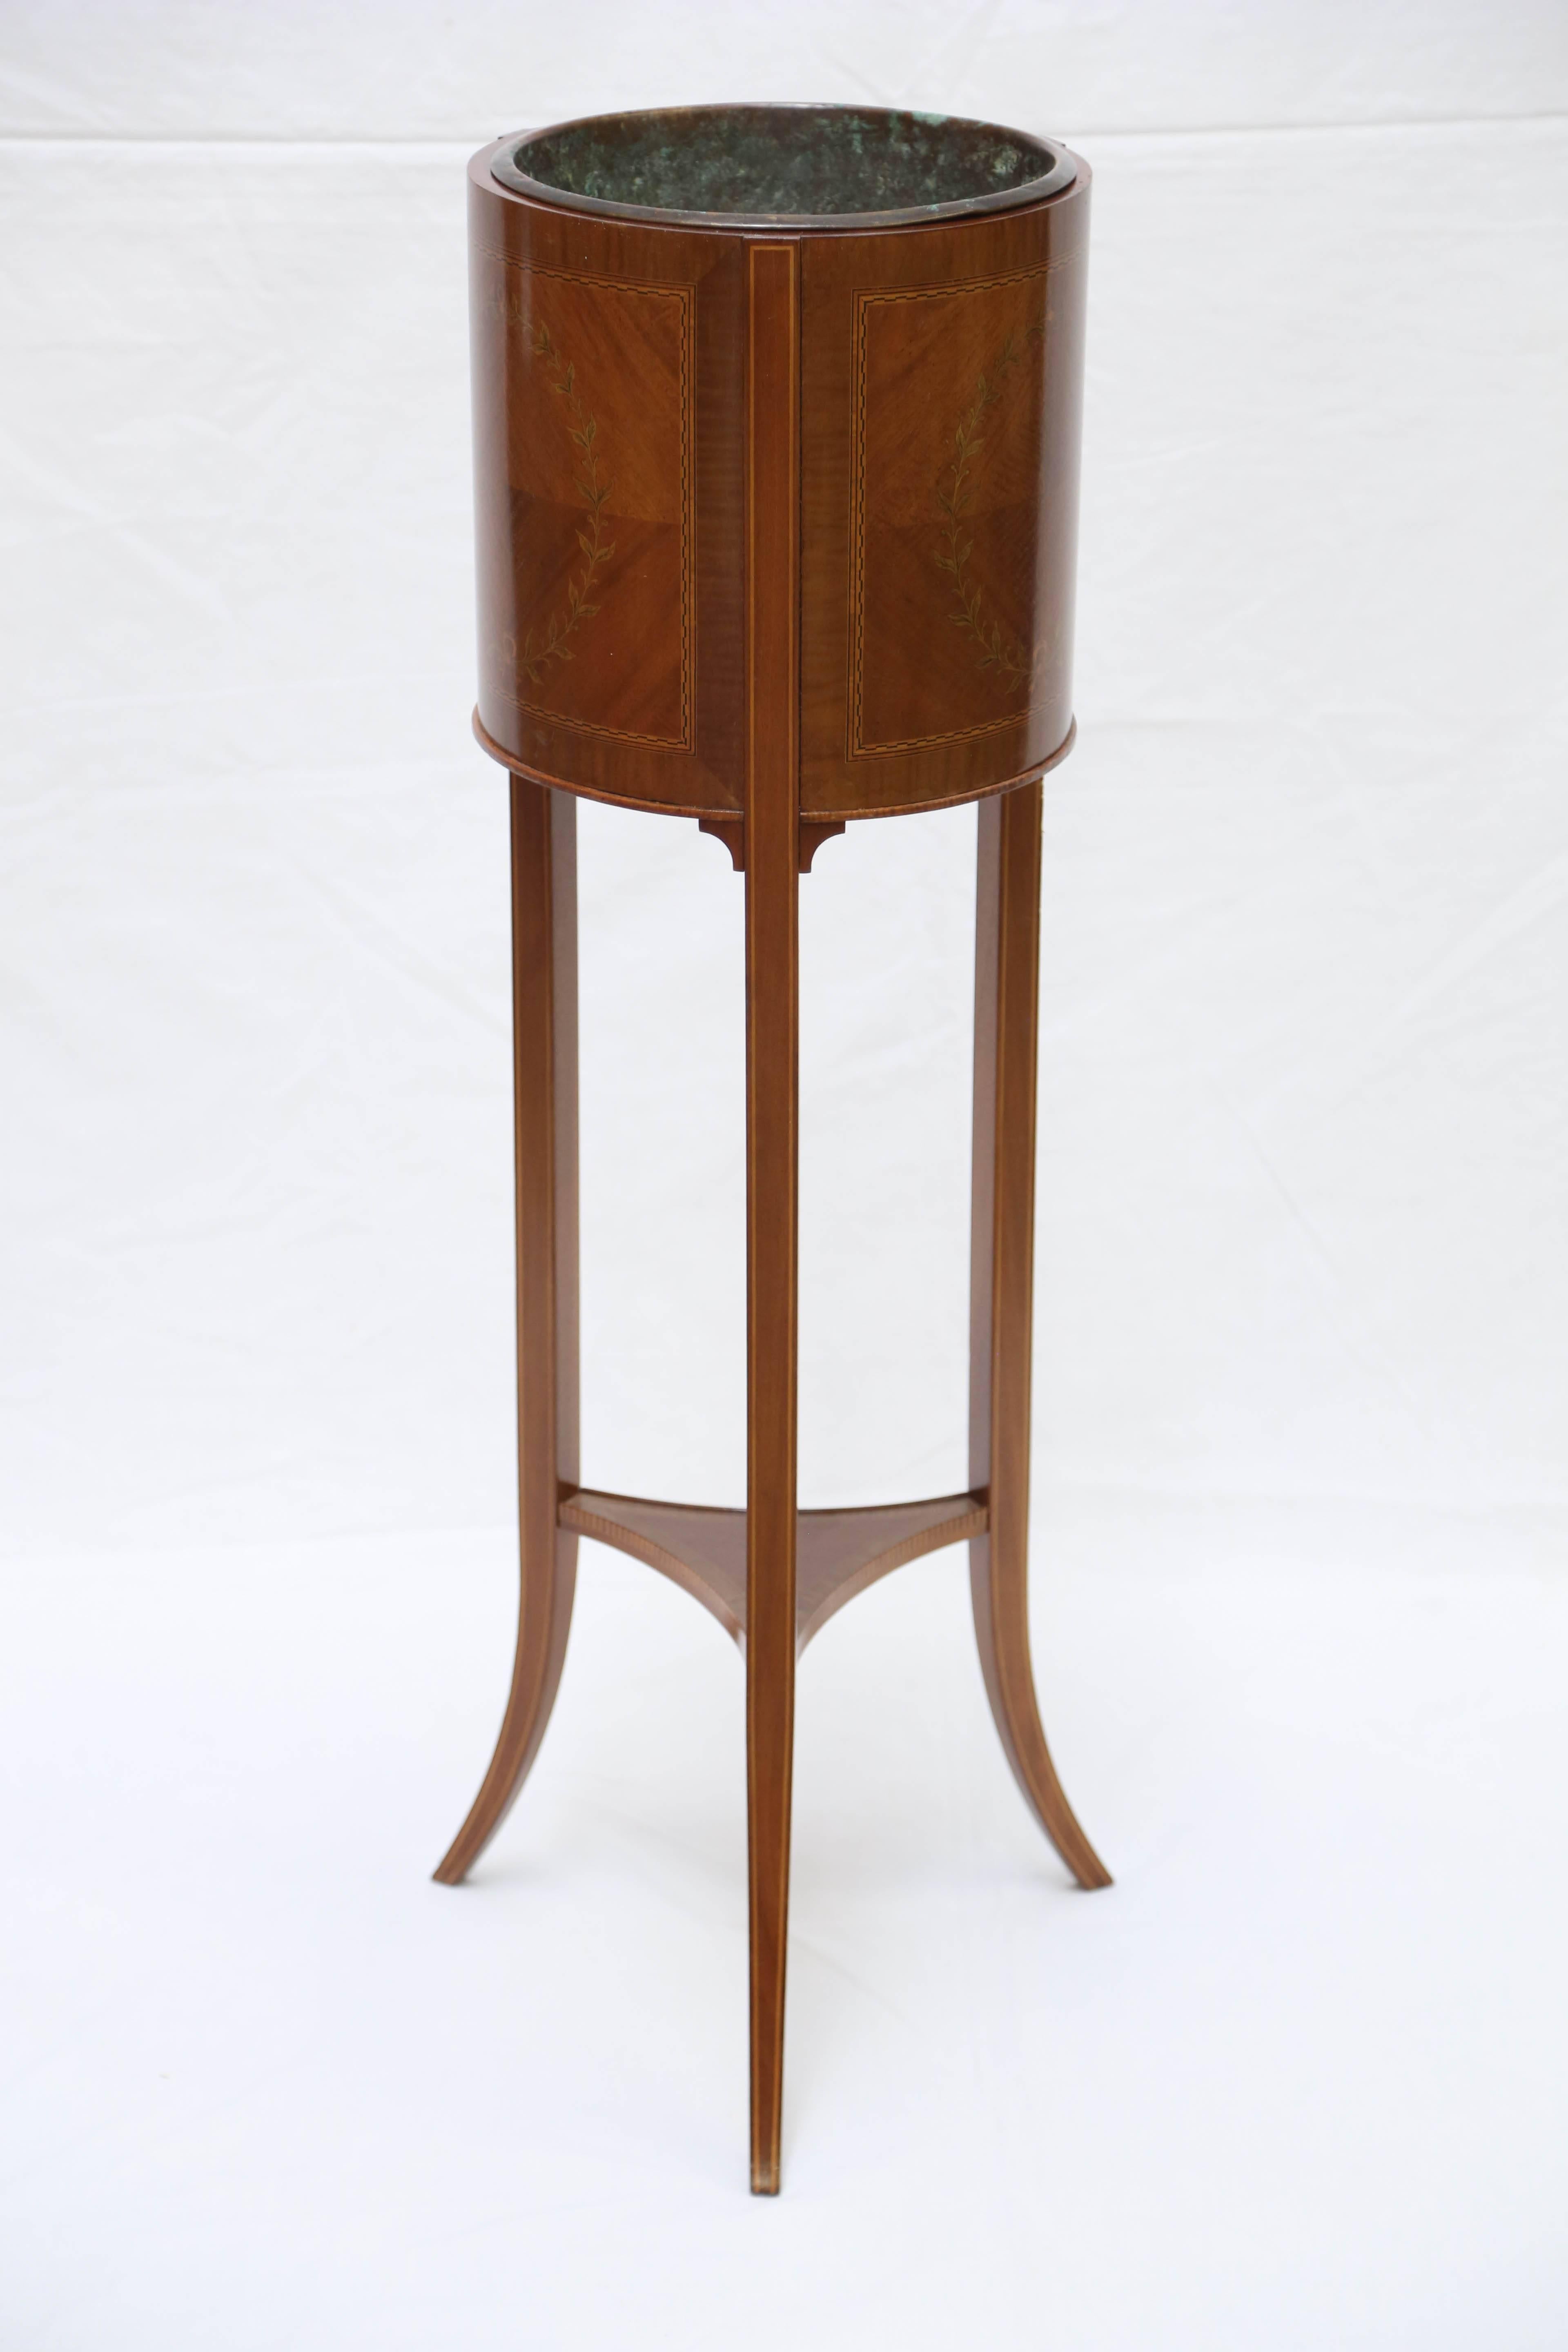 Marquetry Antique English Mahogany Plant Stand Jardiniere